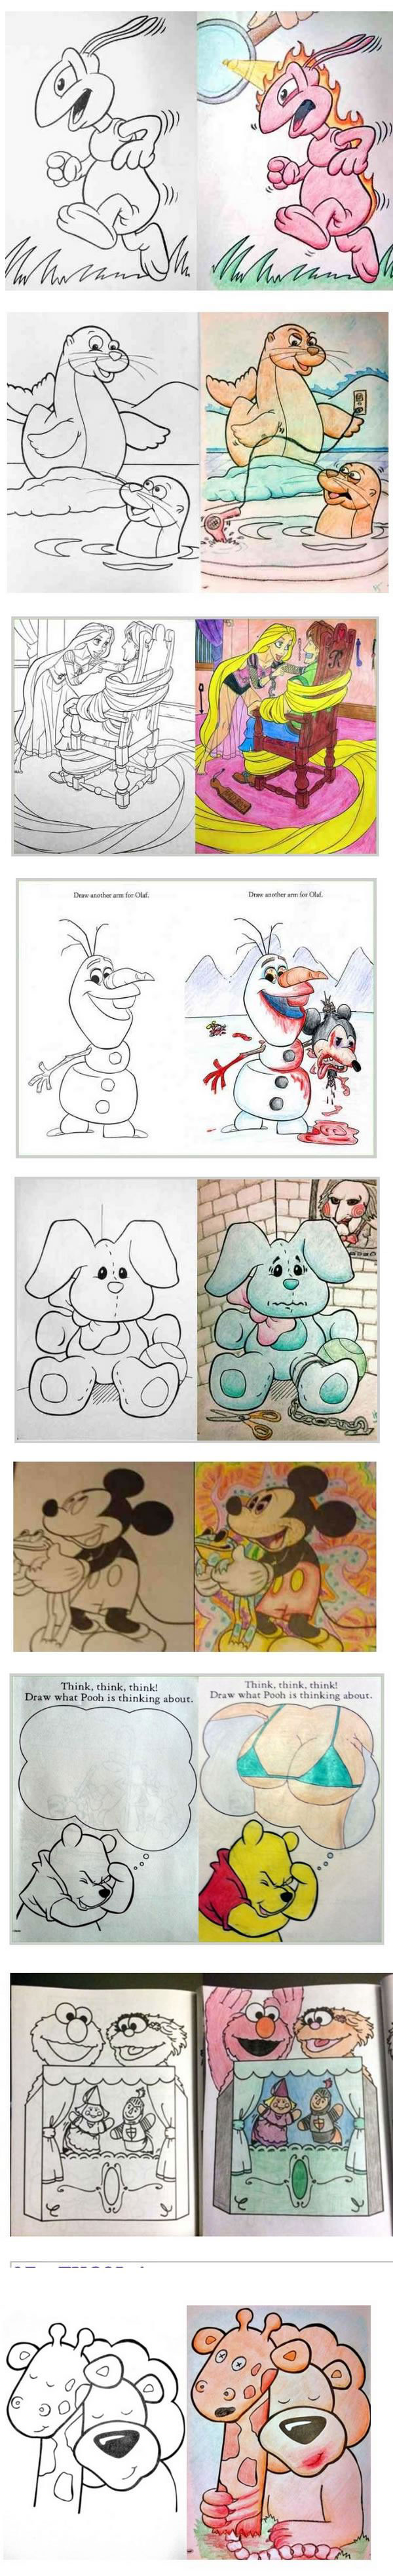 just a series of coloring book corruptions